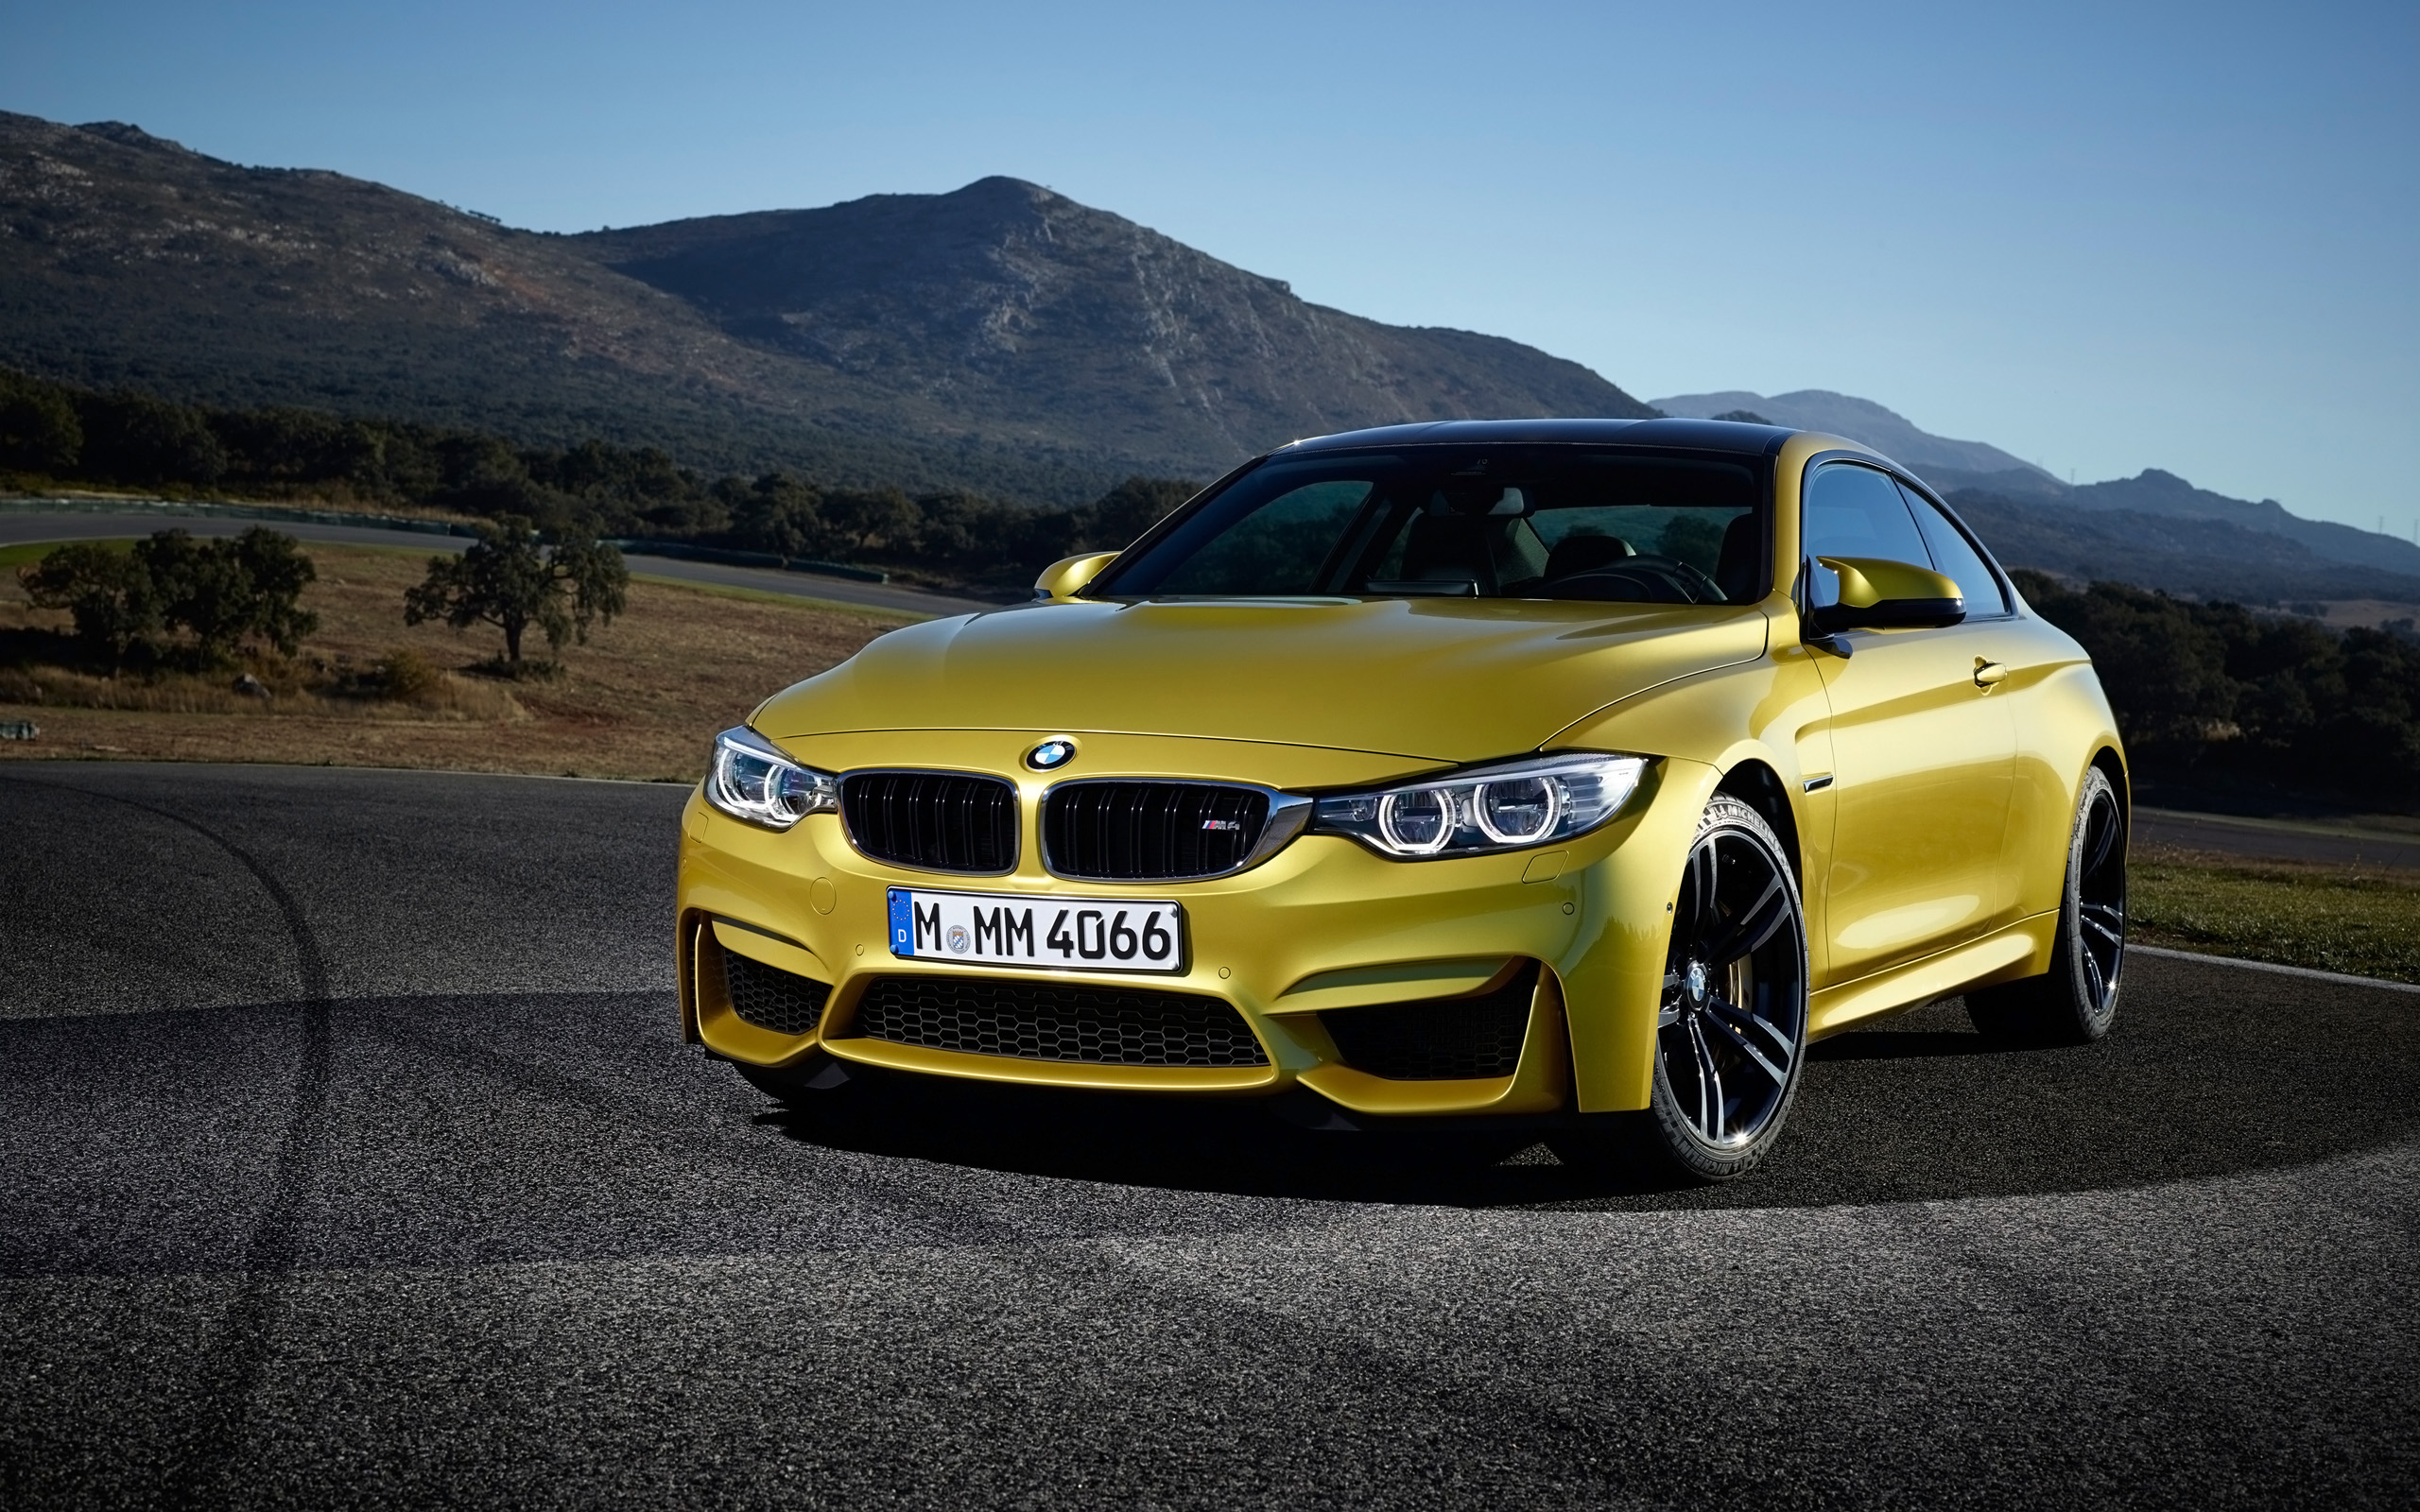 2014 BMW M4 Coupe Wallpaper | HD Car Wallpapers | ID #3954